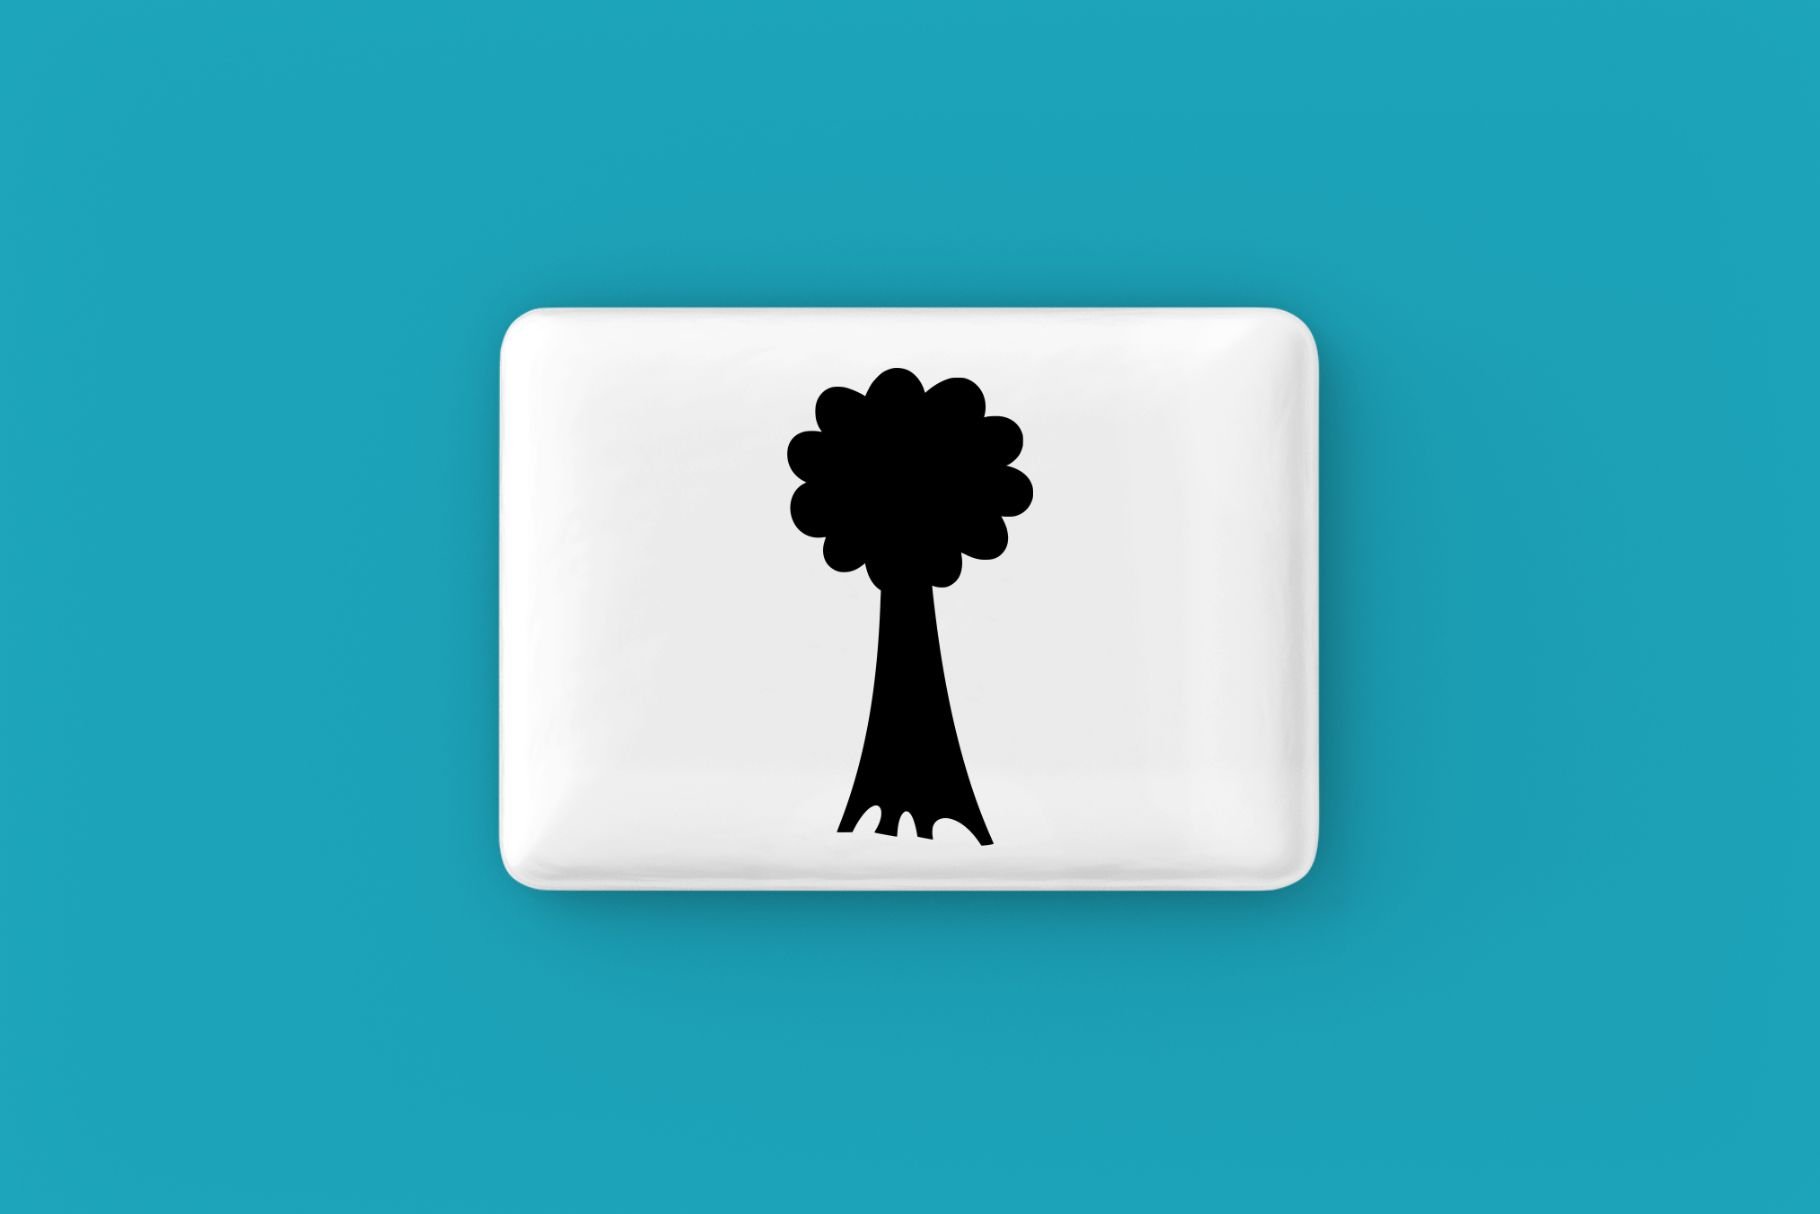 White square button with a black silhouette of a tree.